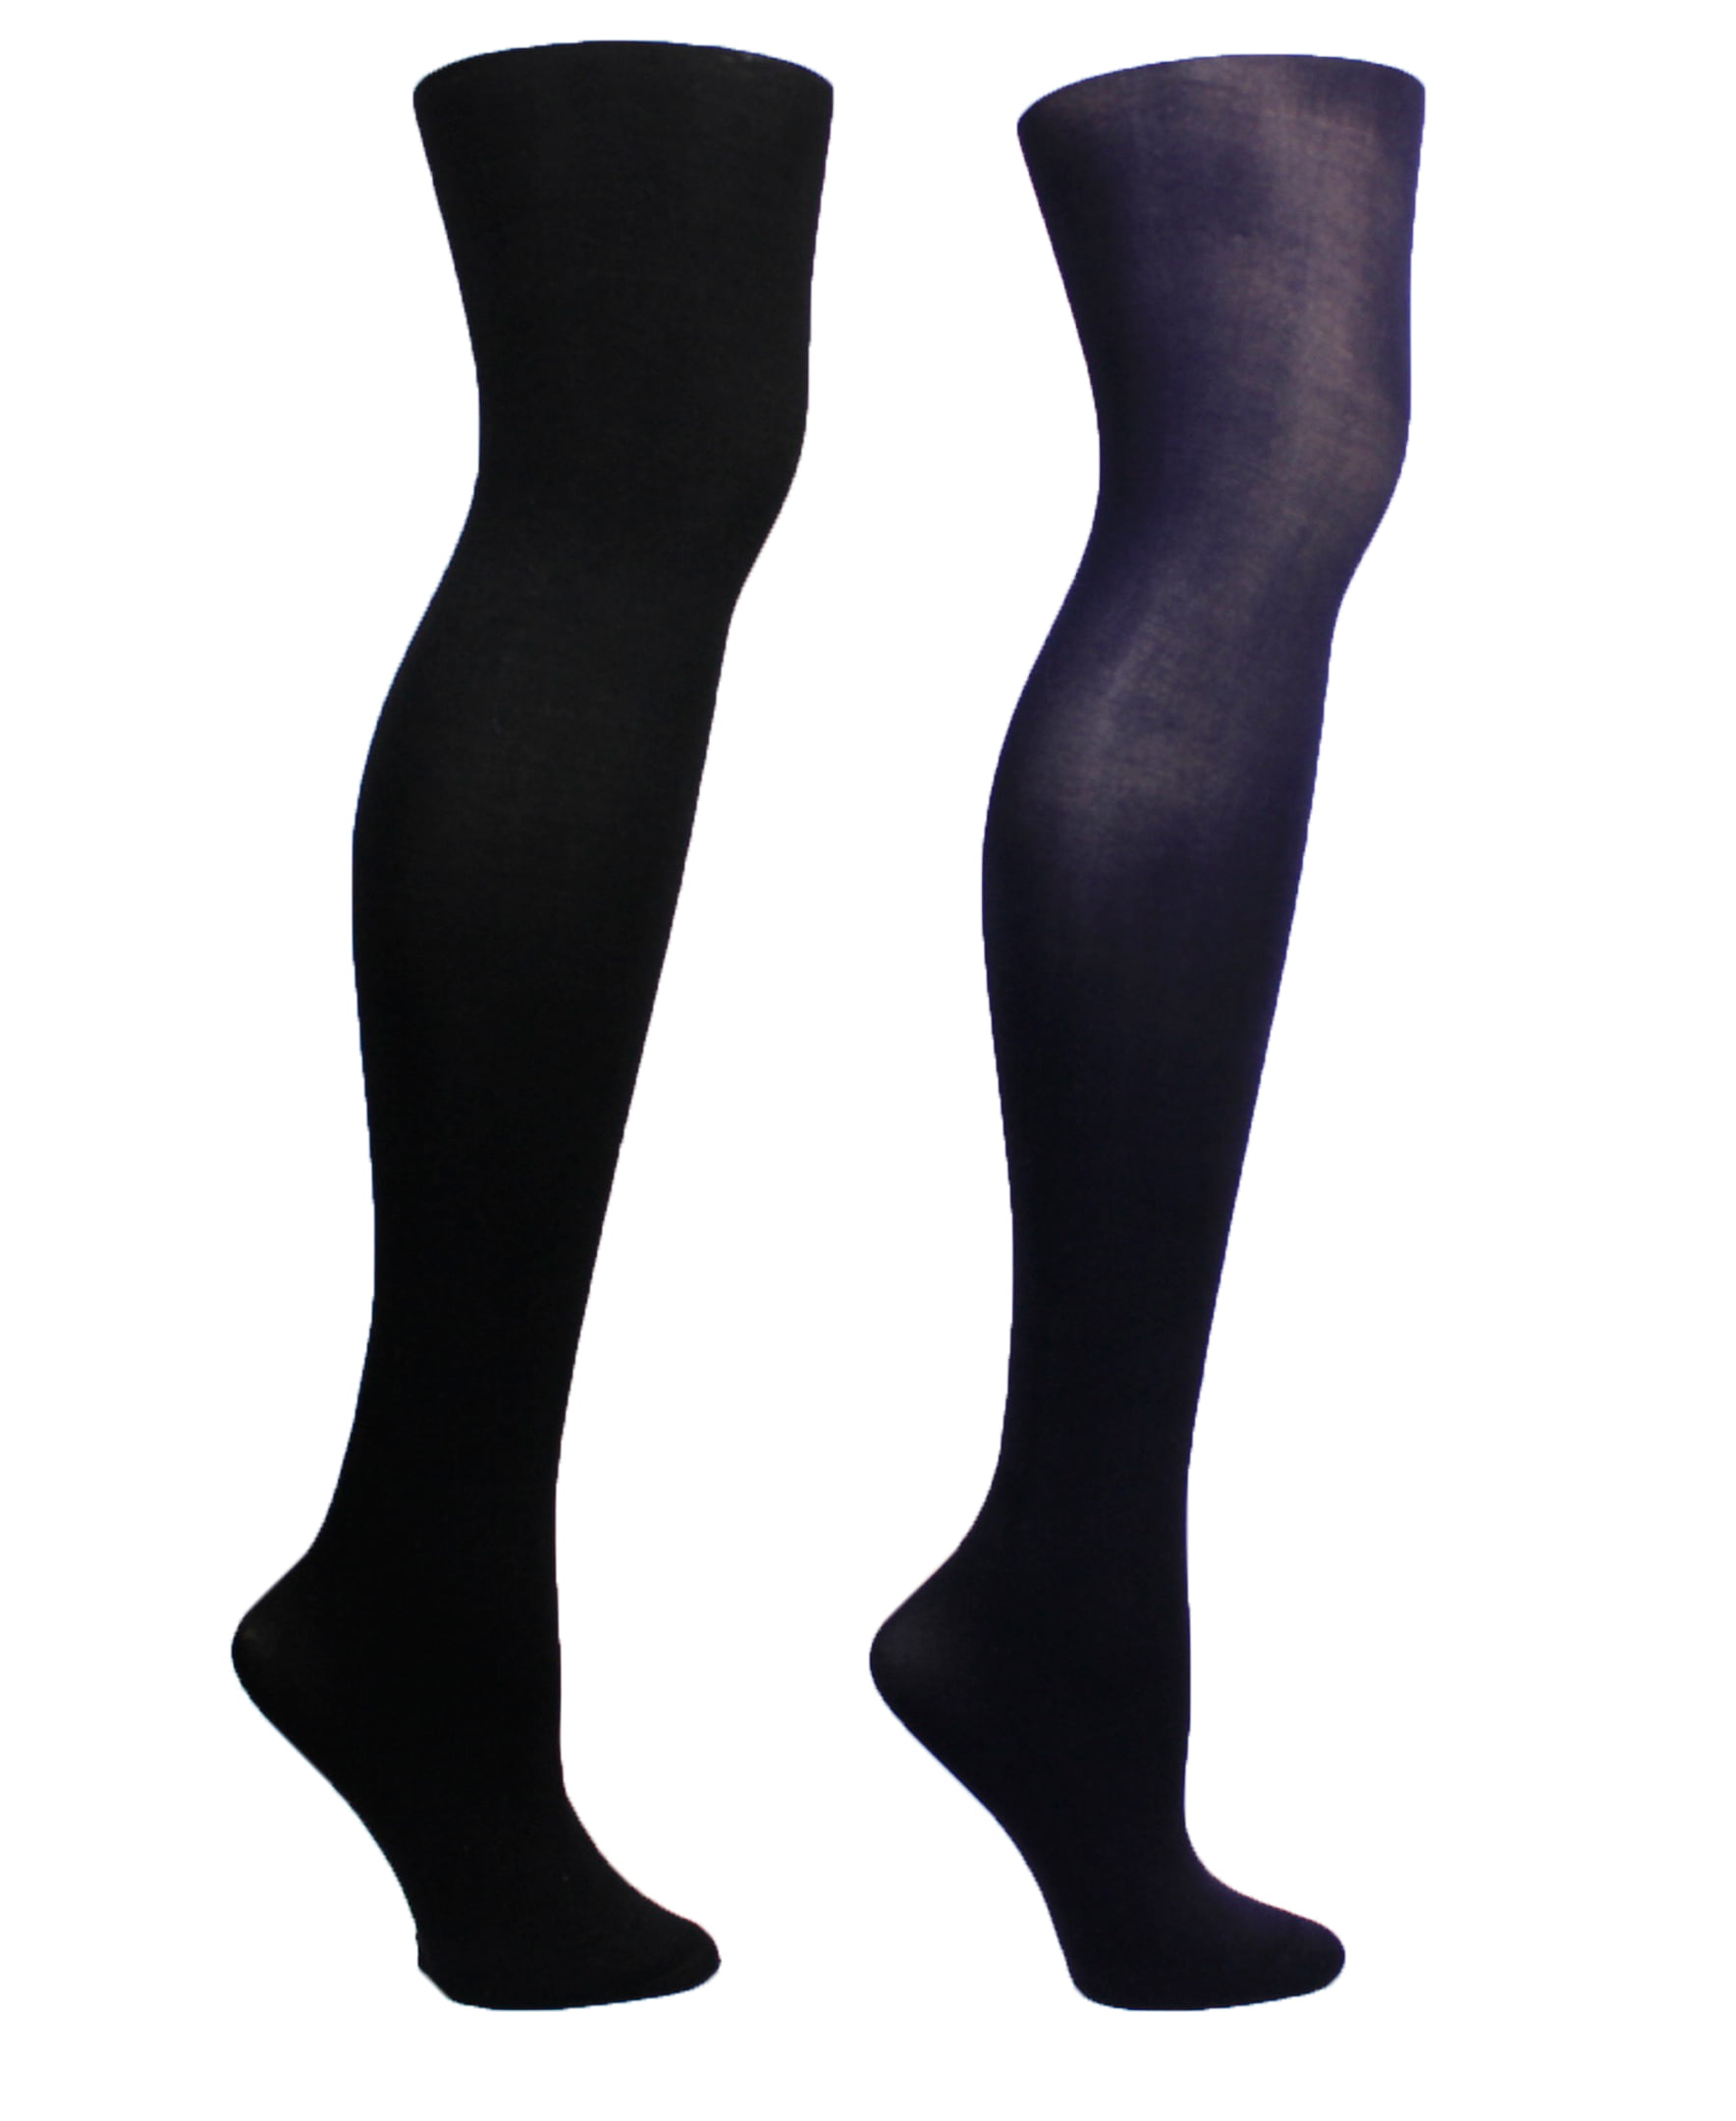 Woman in black opaque tights 2/3, aj965zf